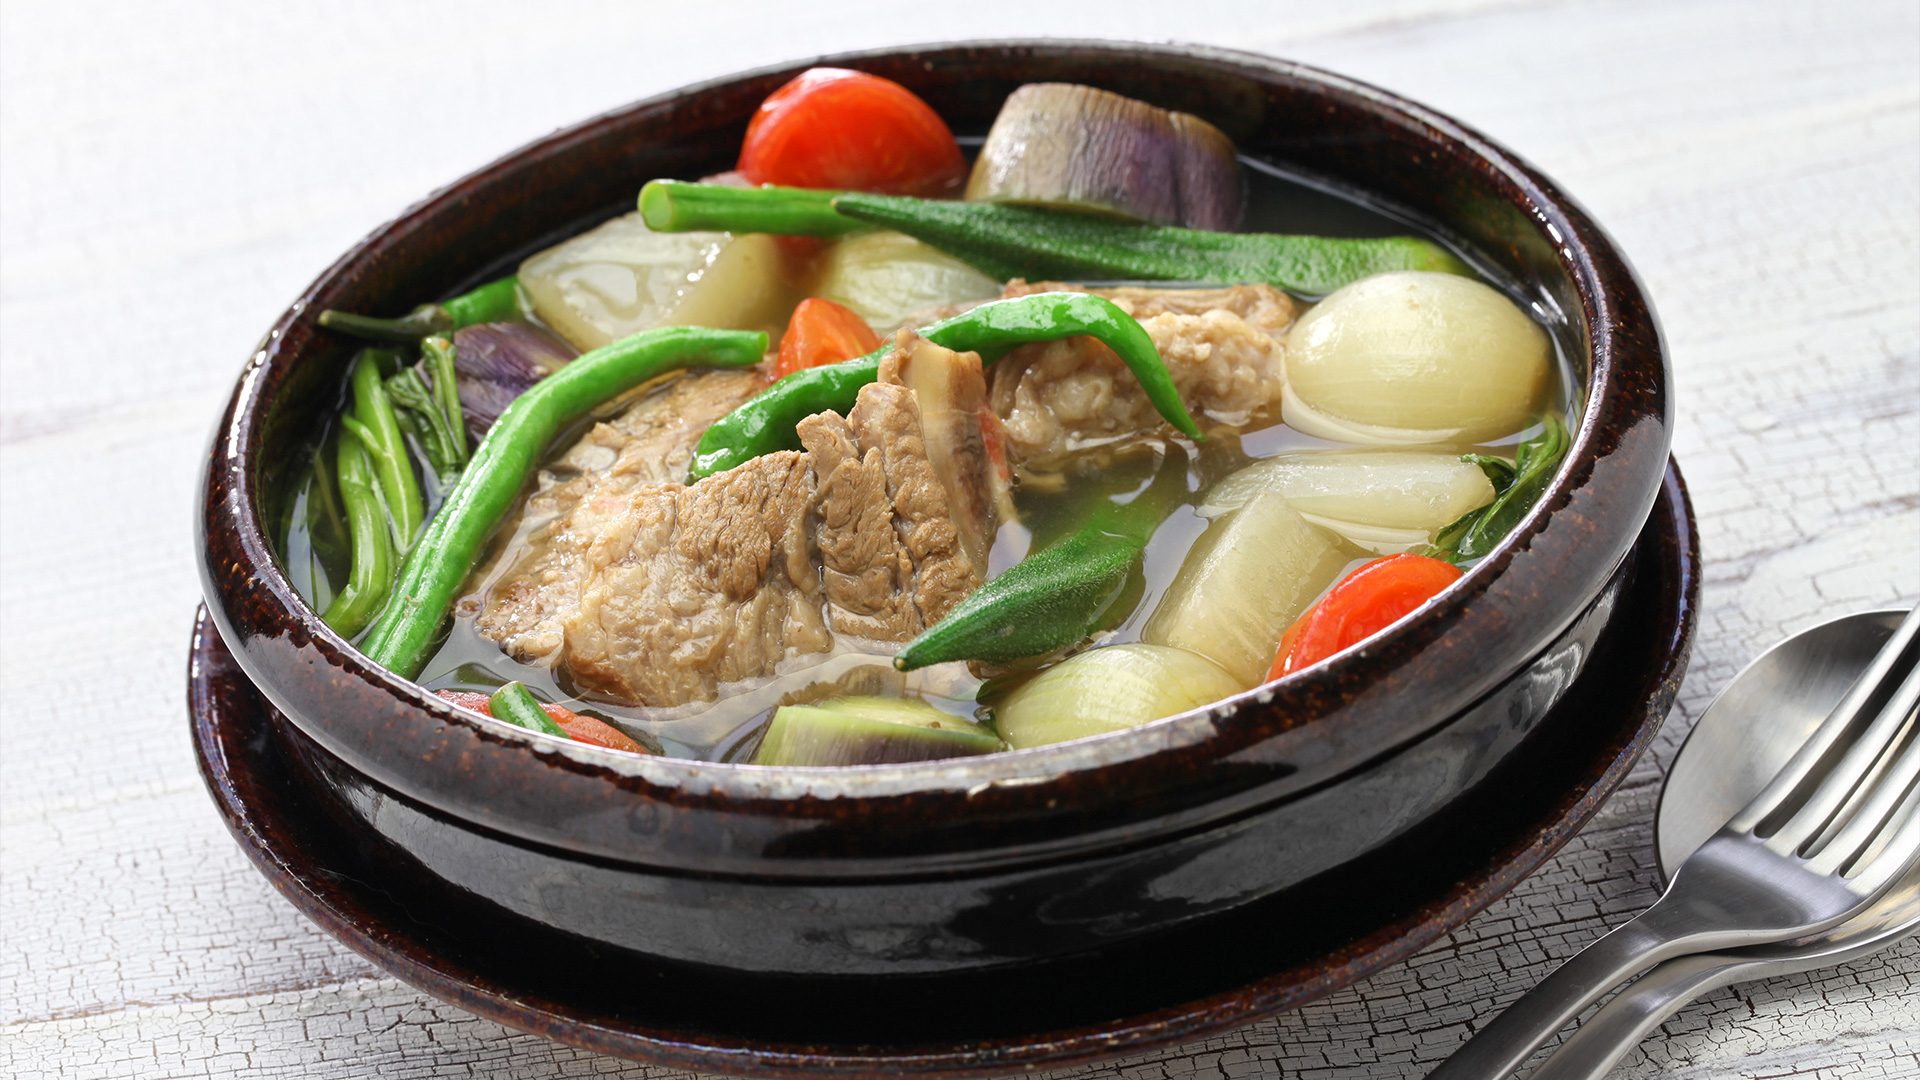 Sinigang is one of the Best Dishes in the World of 2023, according to Taste Atlas